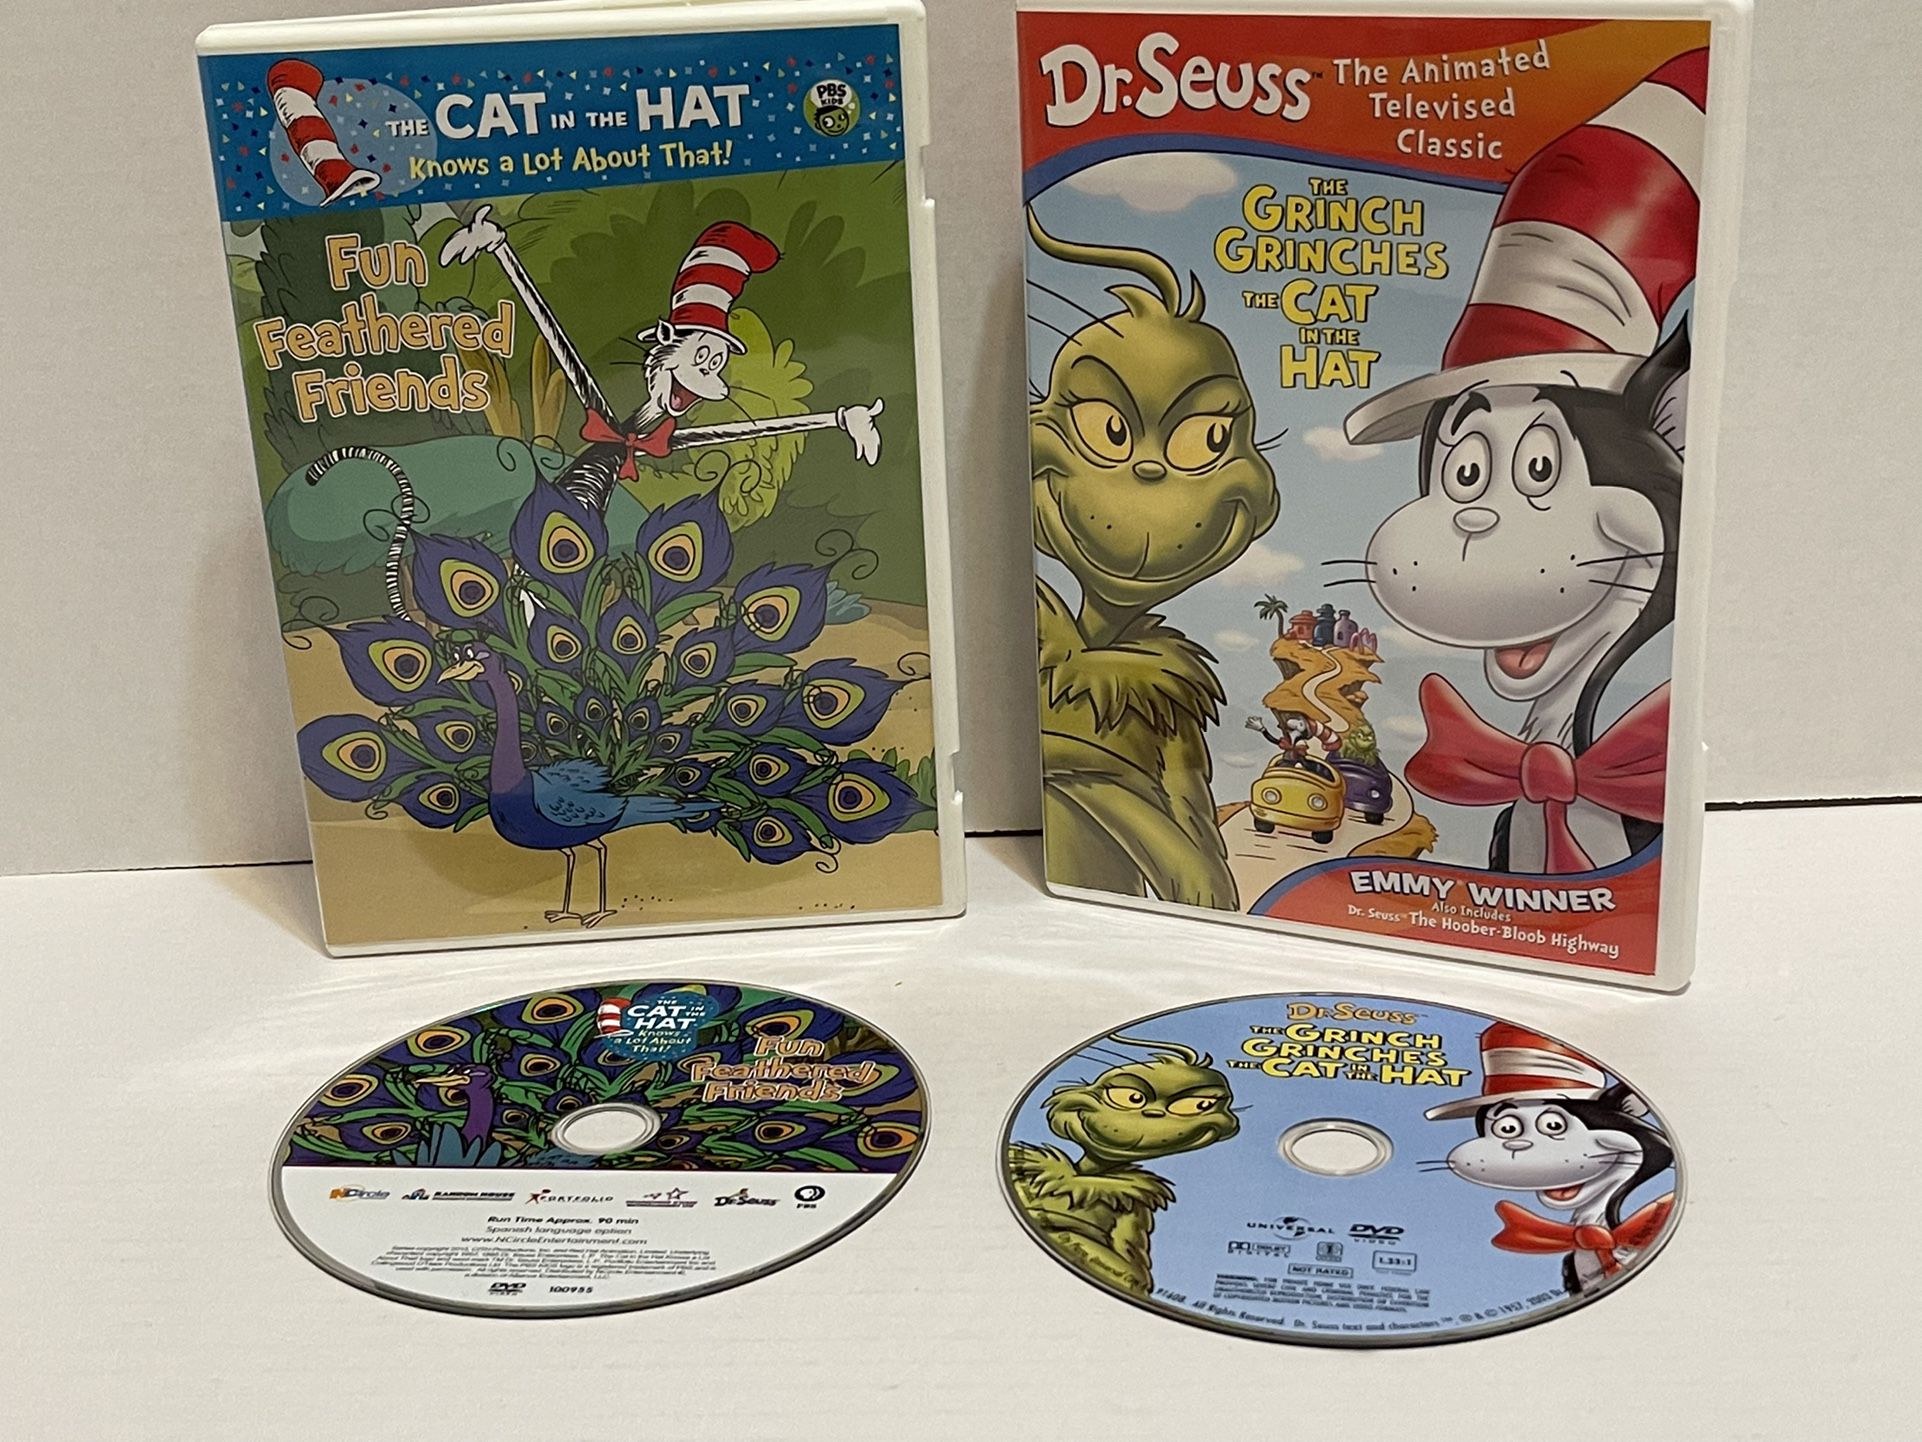 2 The Cat in the Hat DVDs ~ Fun Feathered Friends & The Grinch Grinches the Cat in the Hat